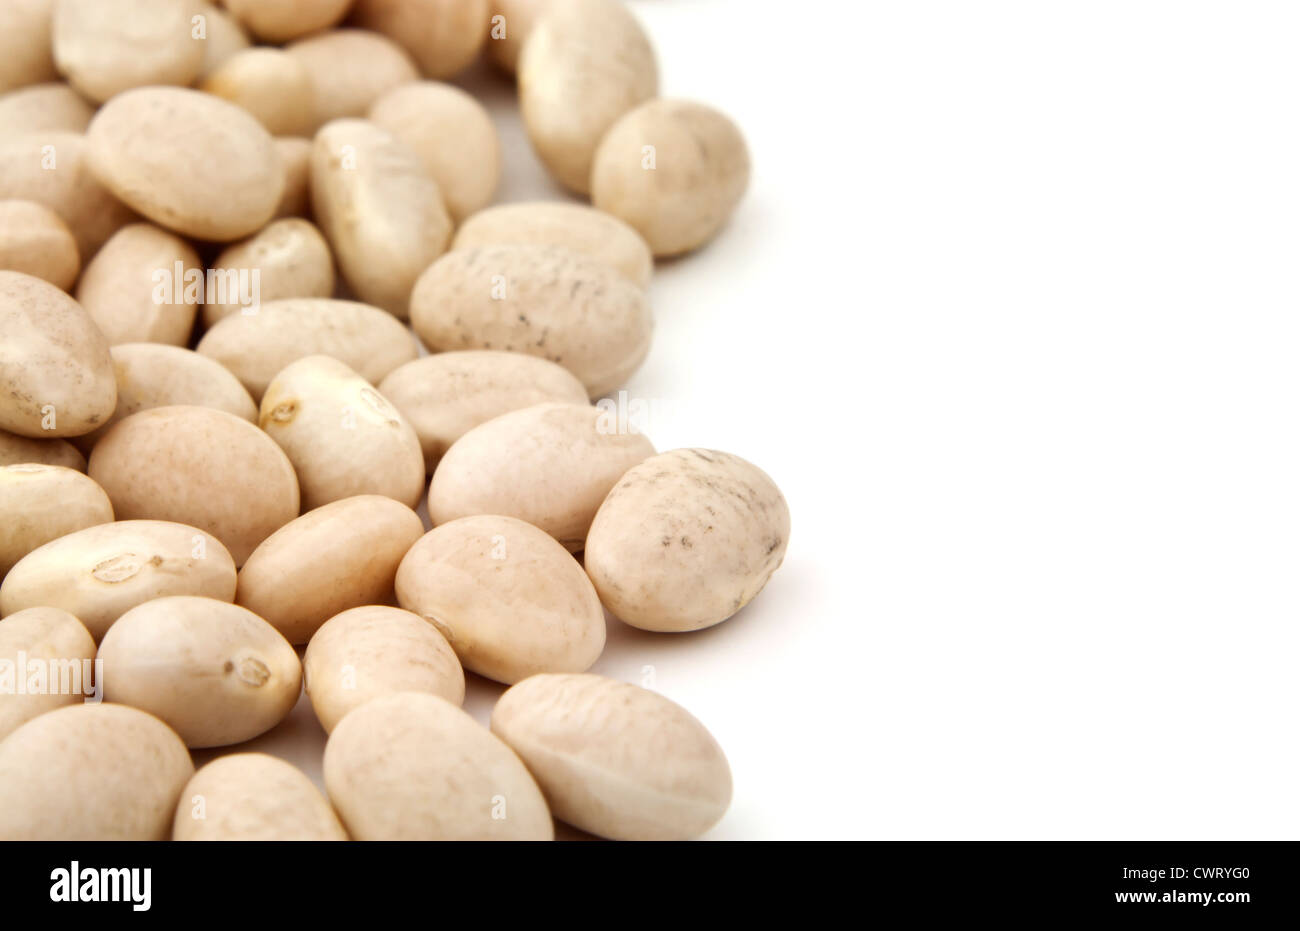 Close up of dry white navy beans on white background with copy space. Stock Photo